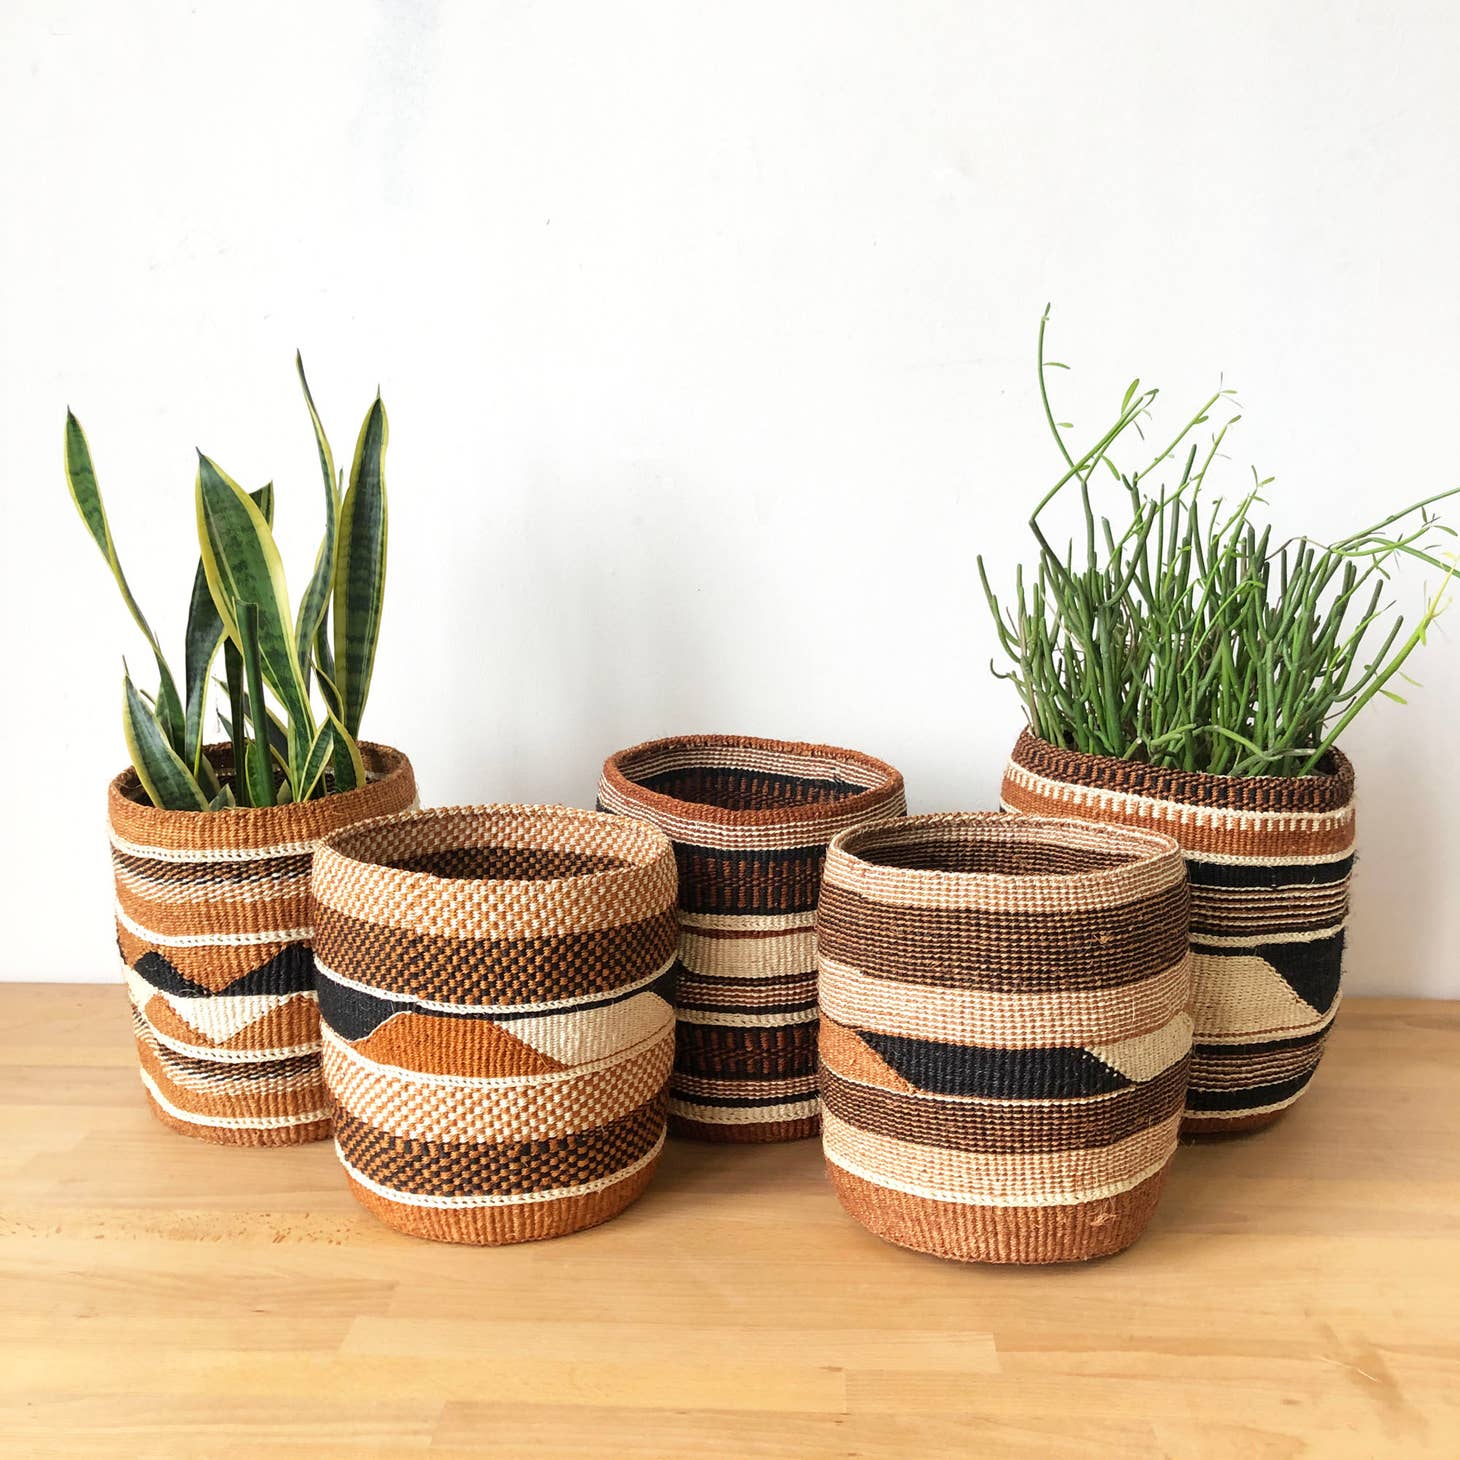 These sisal, woven baskets are handmade by a weaving cooperative in southeastern Kenya.